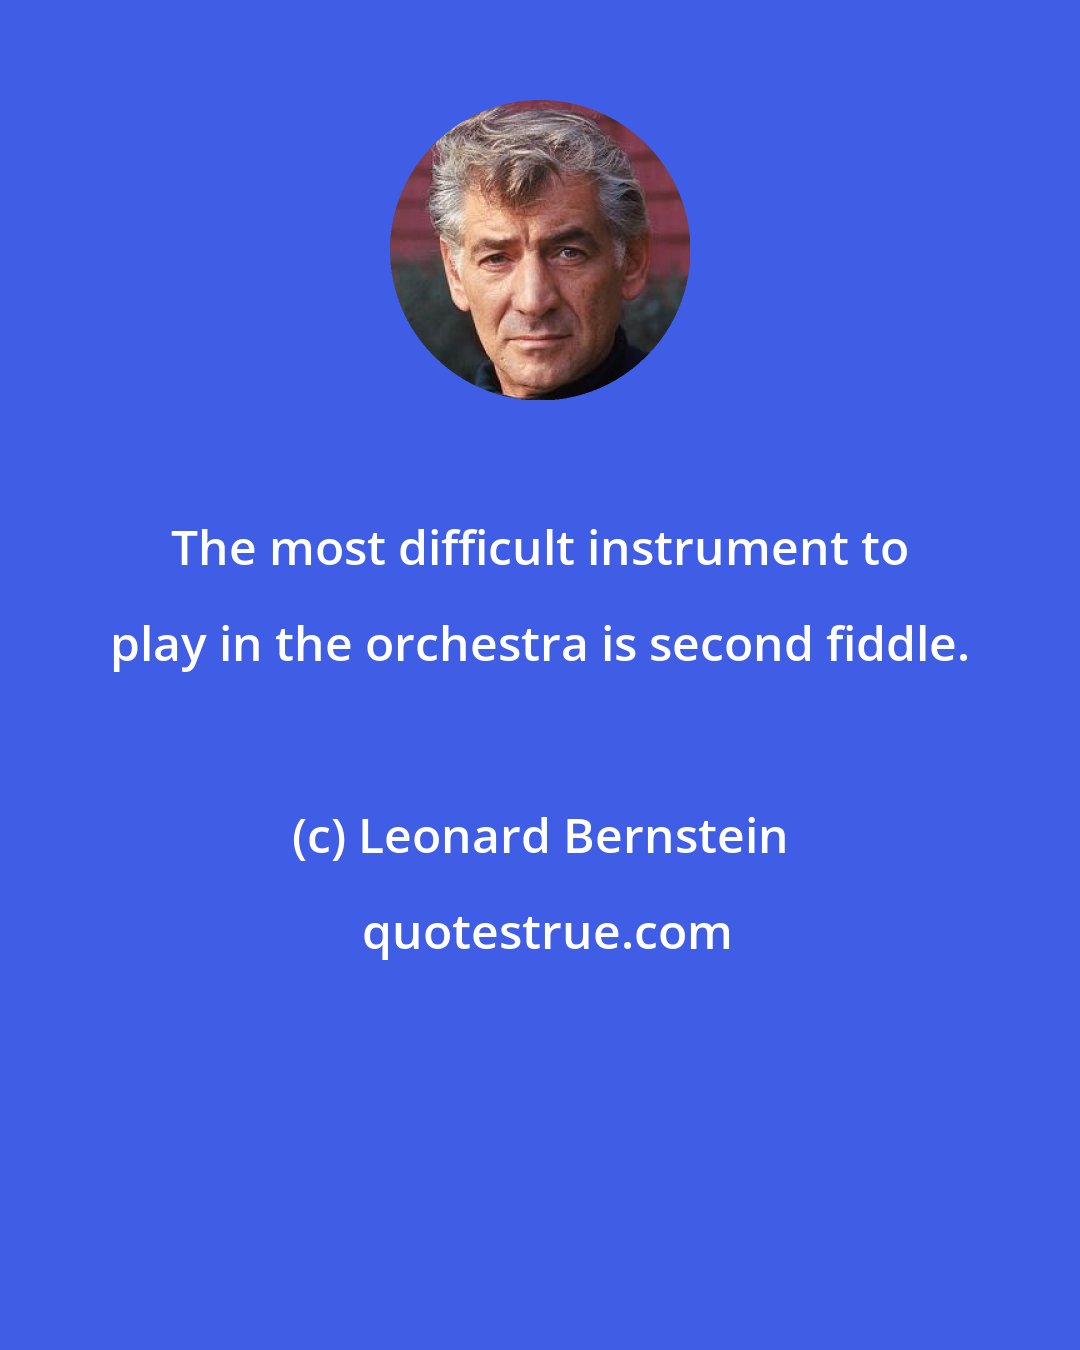 Leonard Bernstein: The most difficult instrument to play in the orchestra is second fiddle.